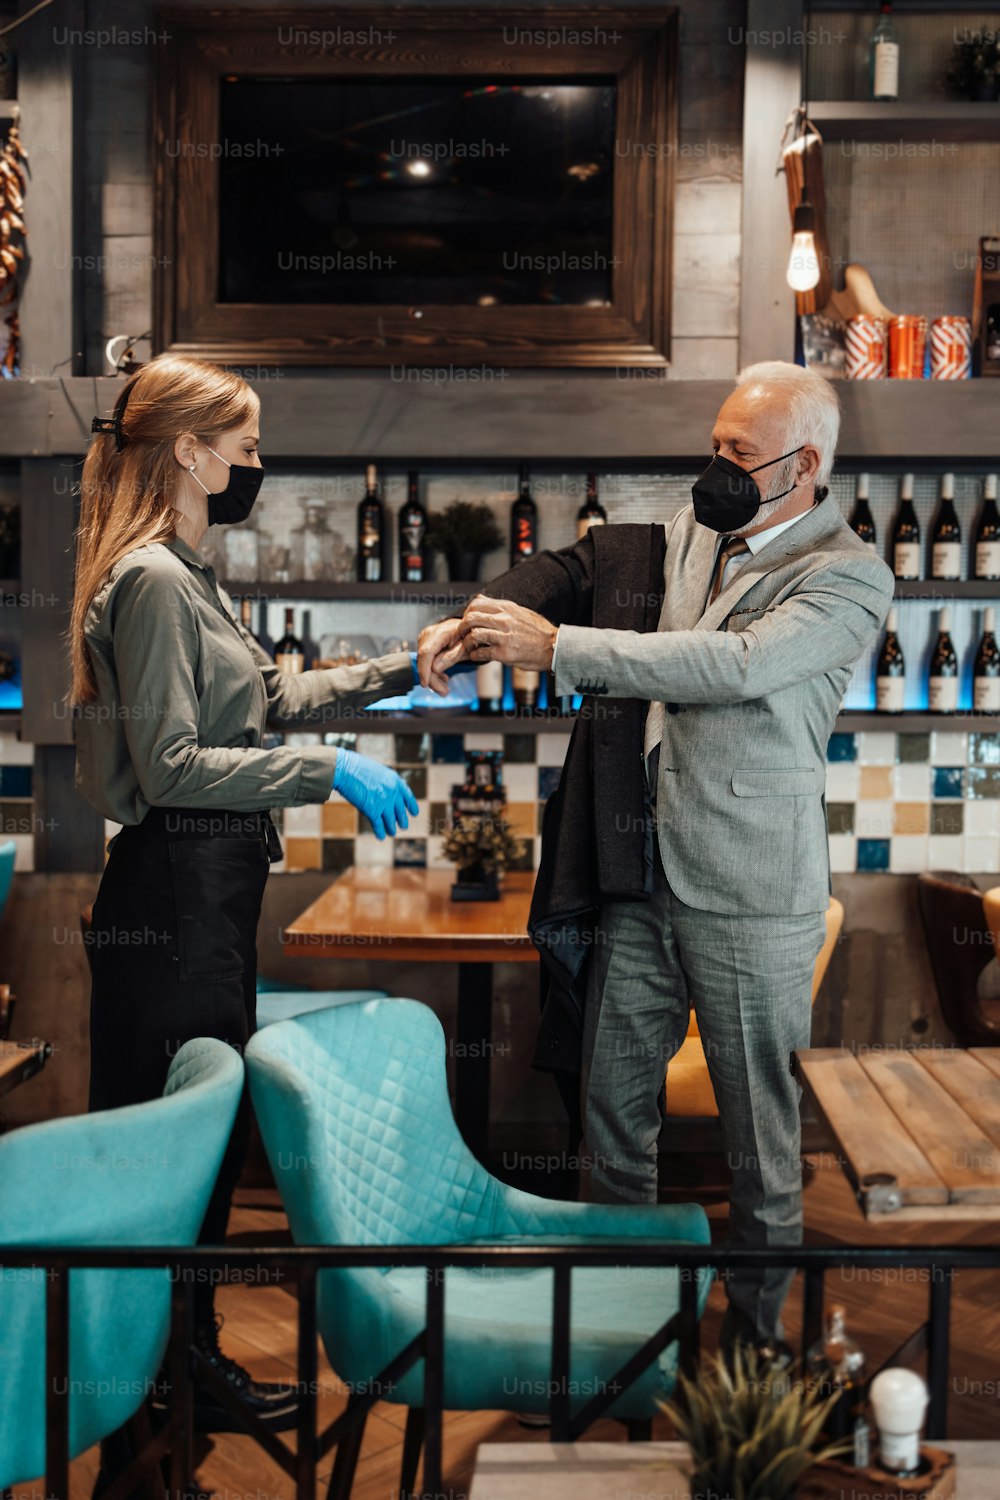 Confident senior businessman standing in exclusive restaurant. He takes off his coat while the waitress helps him. They both wearing protective face masks against virus infection.